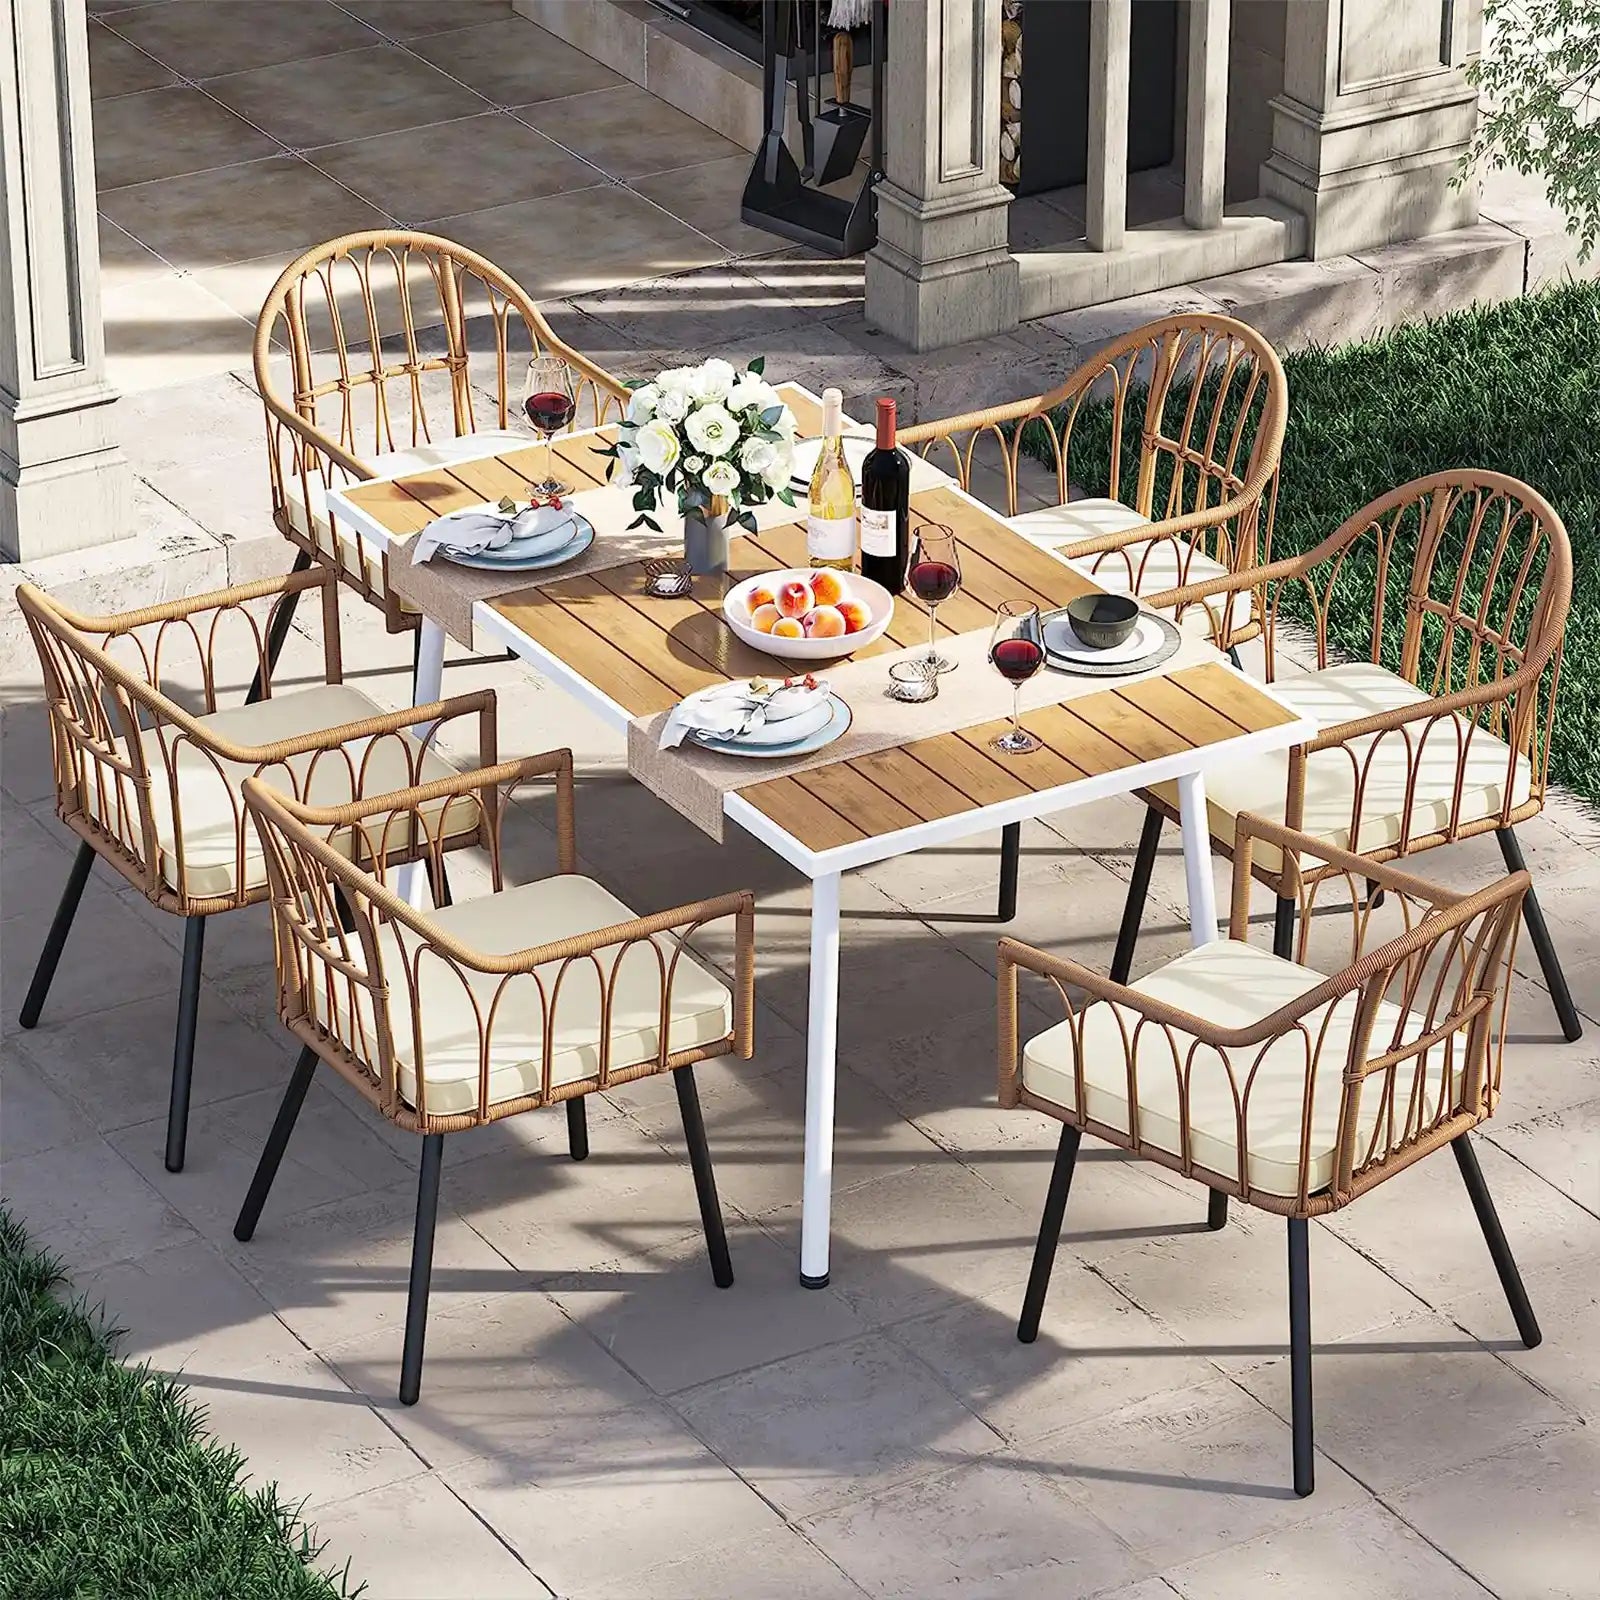 7 Pieces Outdoor Patio Dining Set, Rattan Wicker Patio Dining Chair & Table Set for 6 People, Sectional Conversation Set with Umbrella Hole for Garden